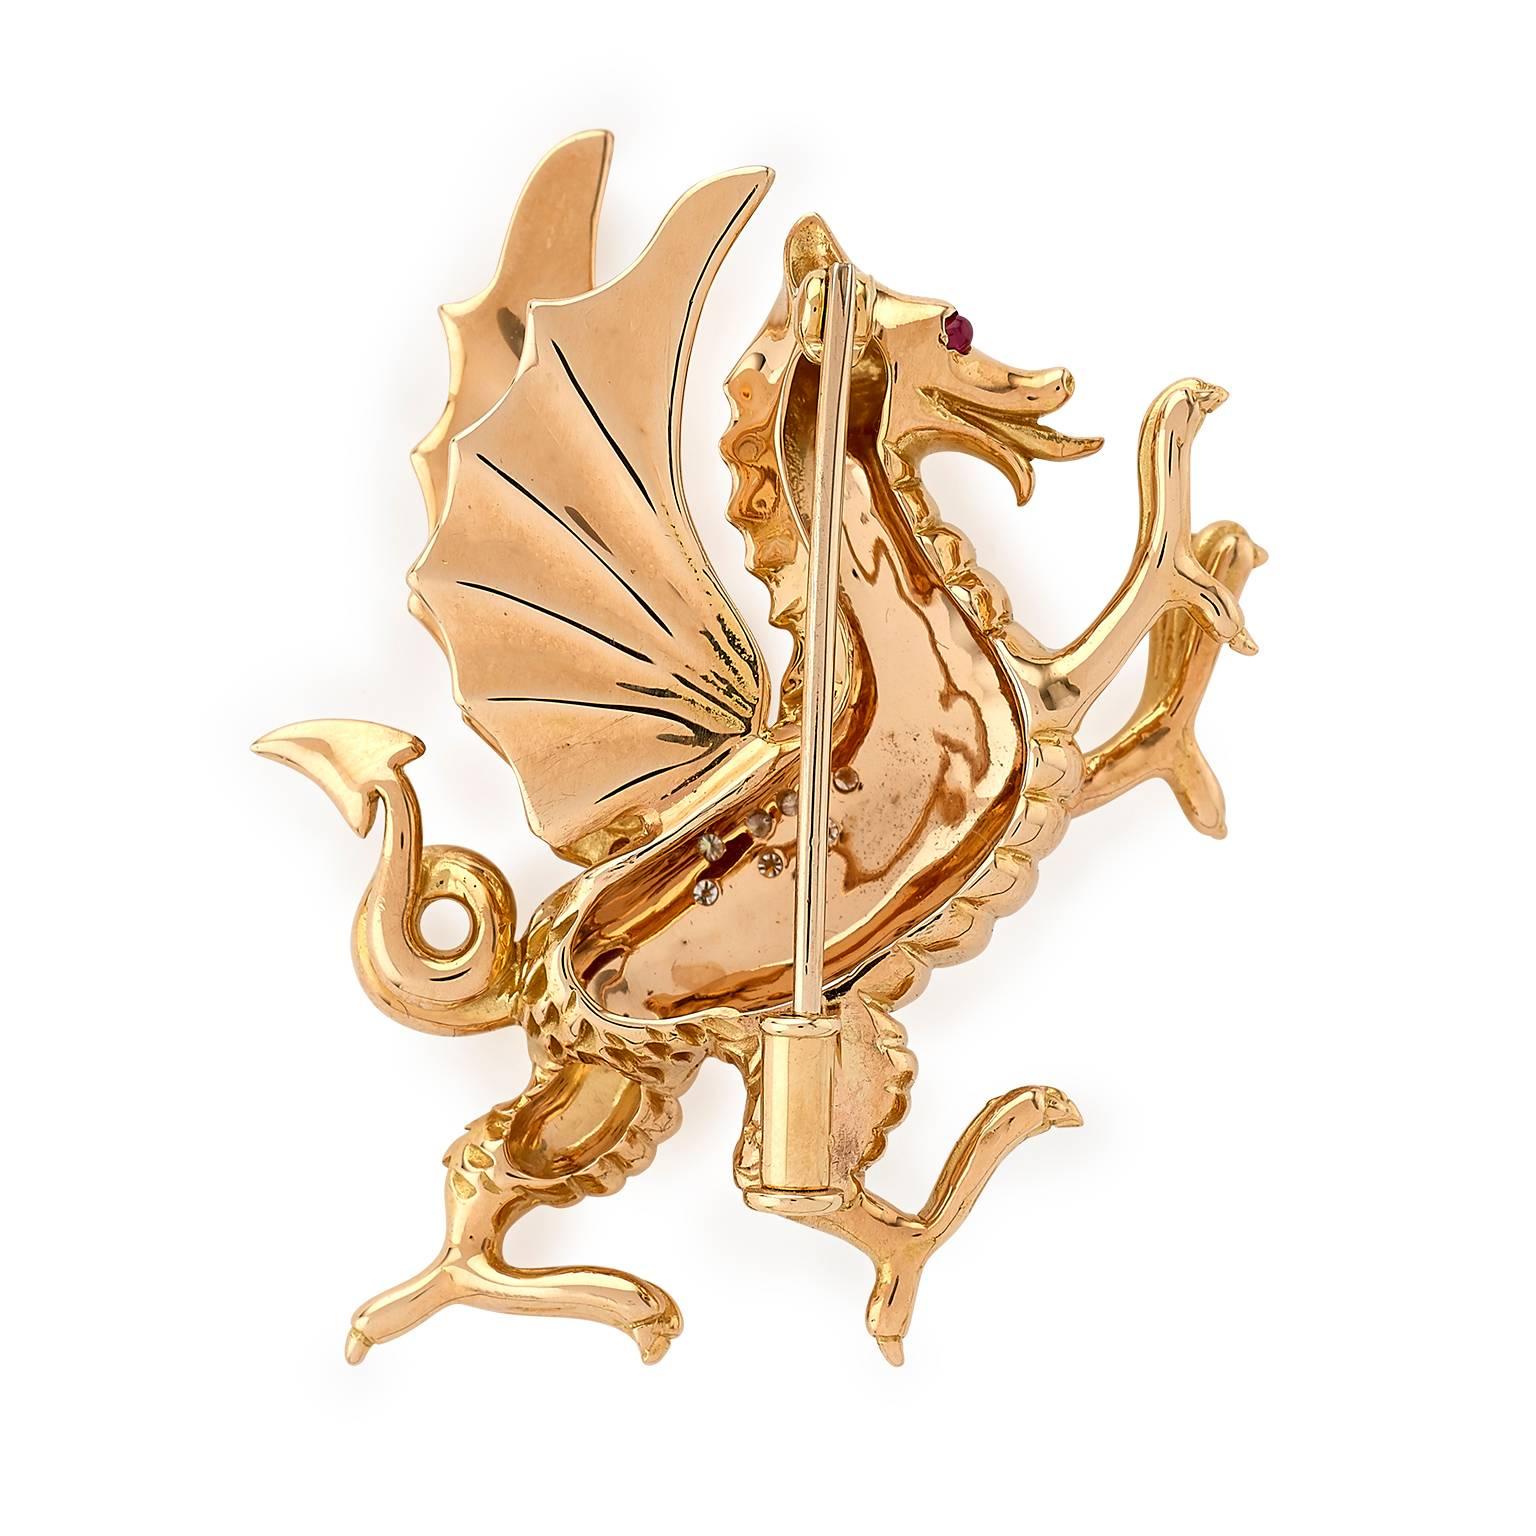 Welsh dragon brooch handmade in 18 carat rose gold with .32 carats diamonds set to its wings, cabochon cut ruby eyes. With easy to use yet secure tube catch brooch fitting. Handmade in E Wolfe and Company’s London Workshop